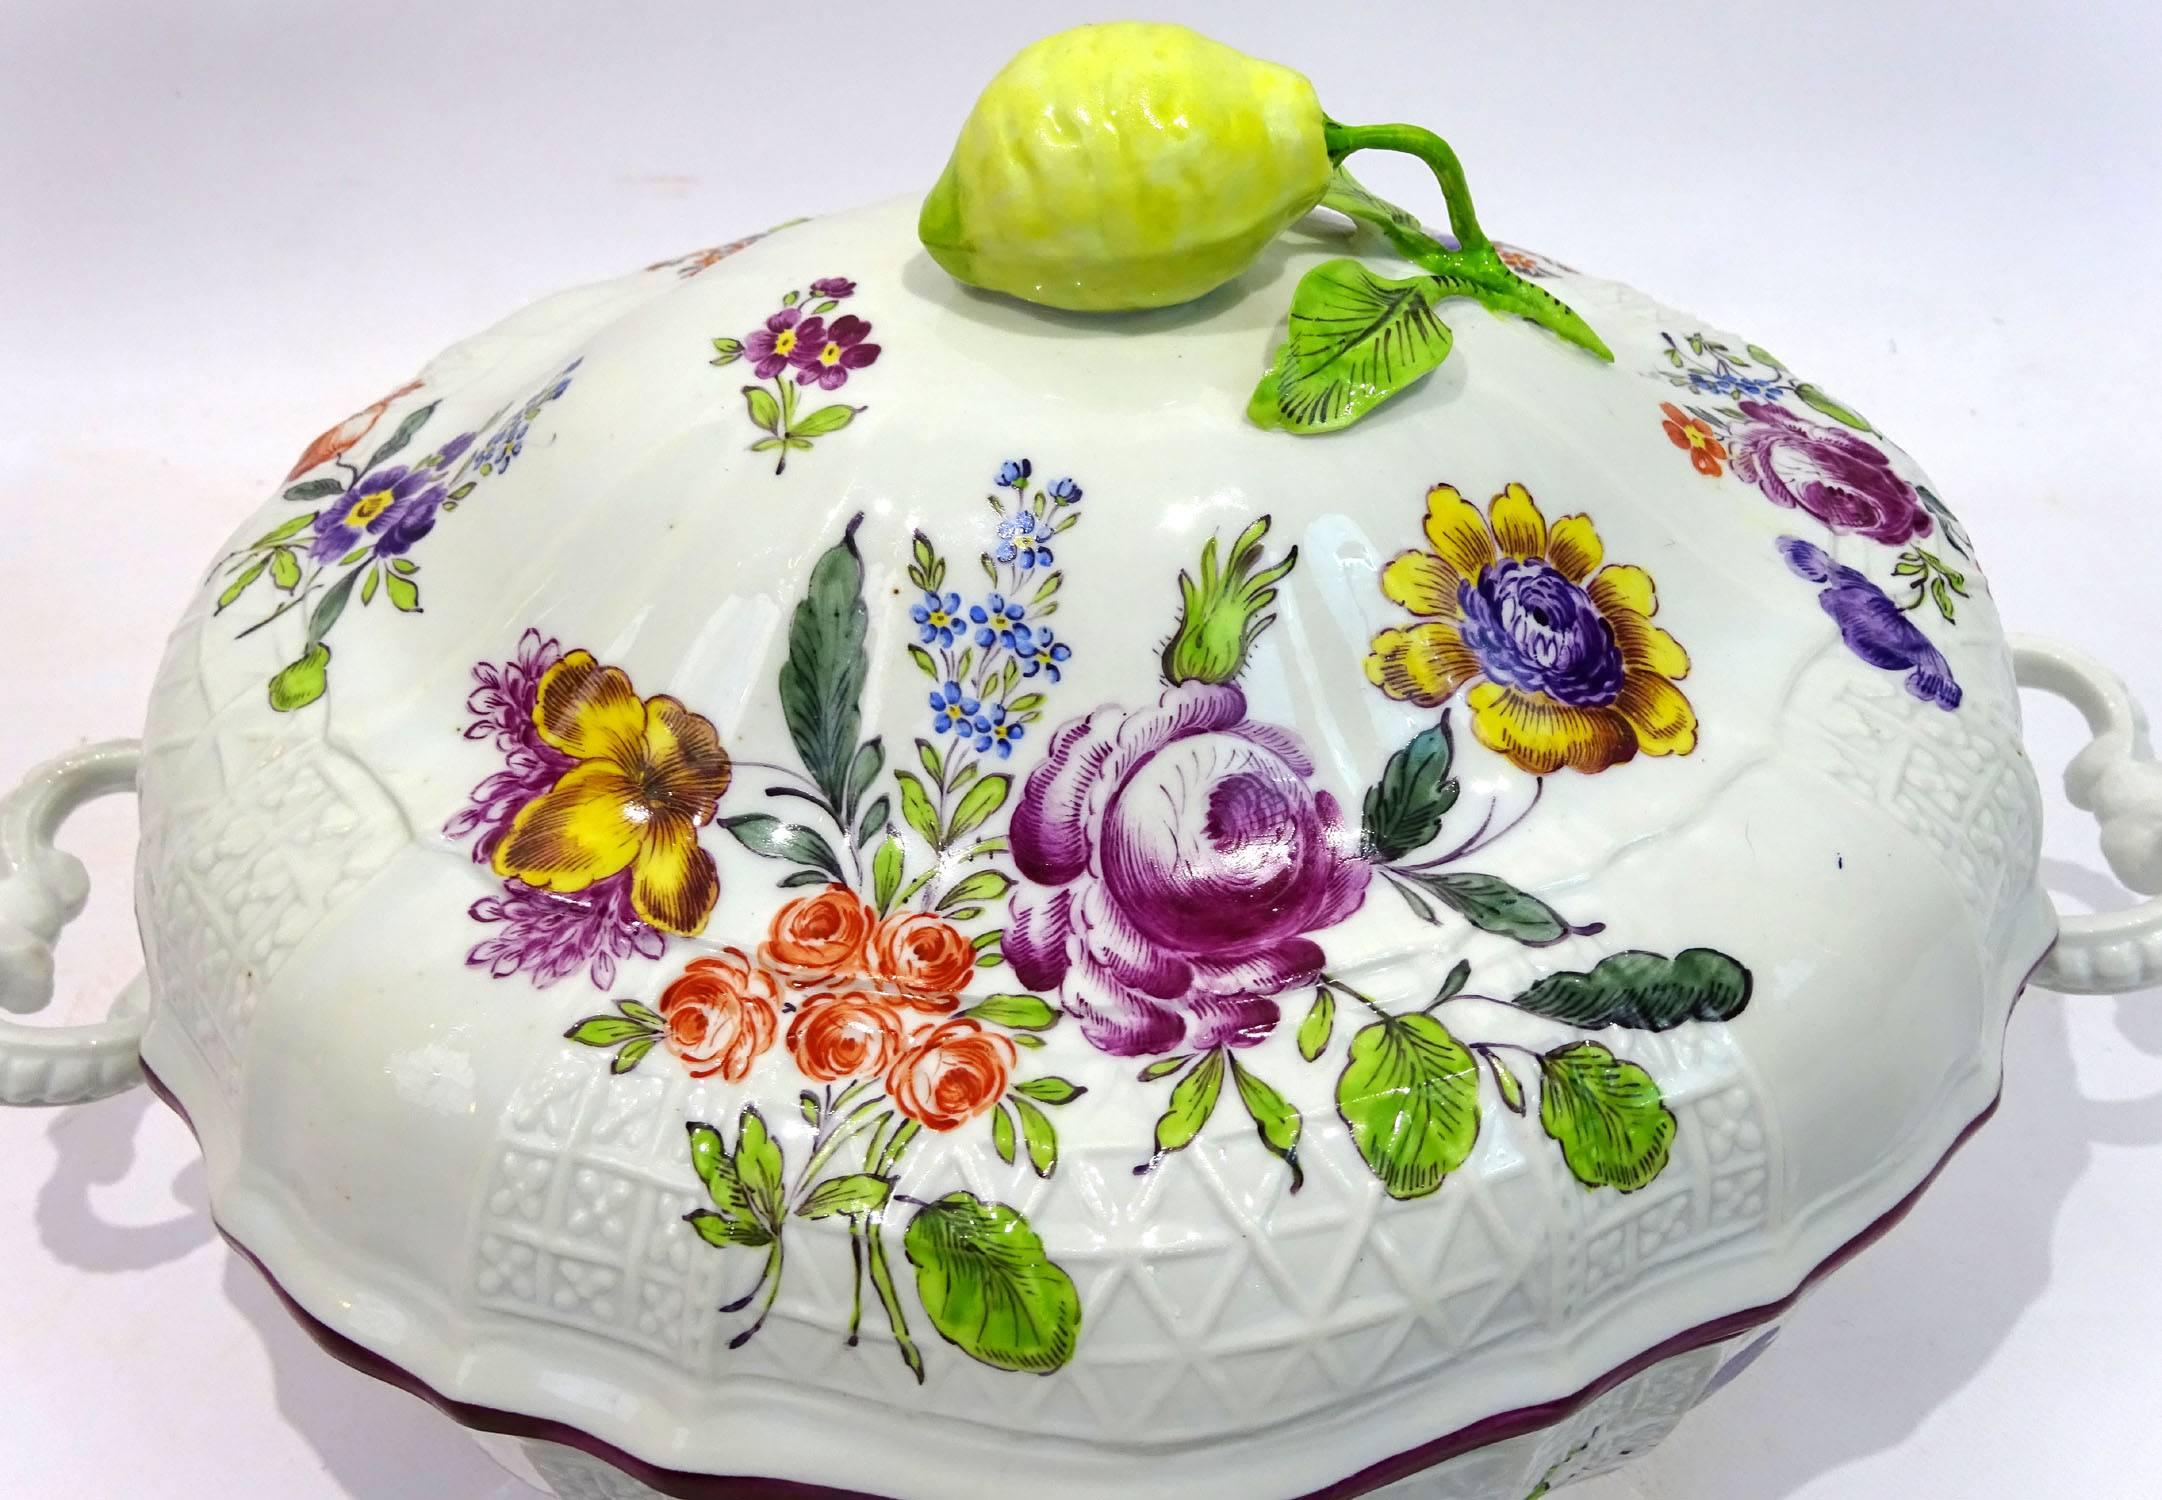 Early 20th century beautifully handcrafted Meissen style shaped porcelain tureen with floral design and lemon-shaped top handle, and stamped 